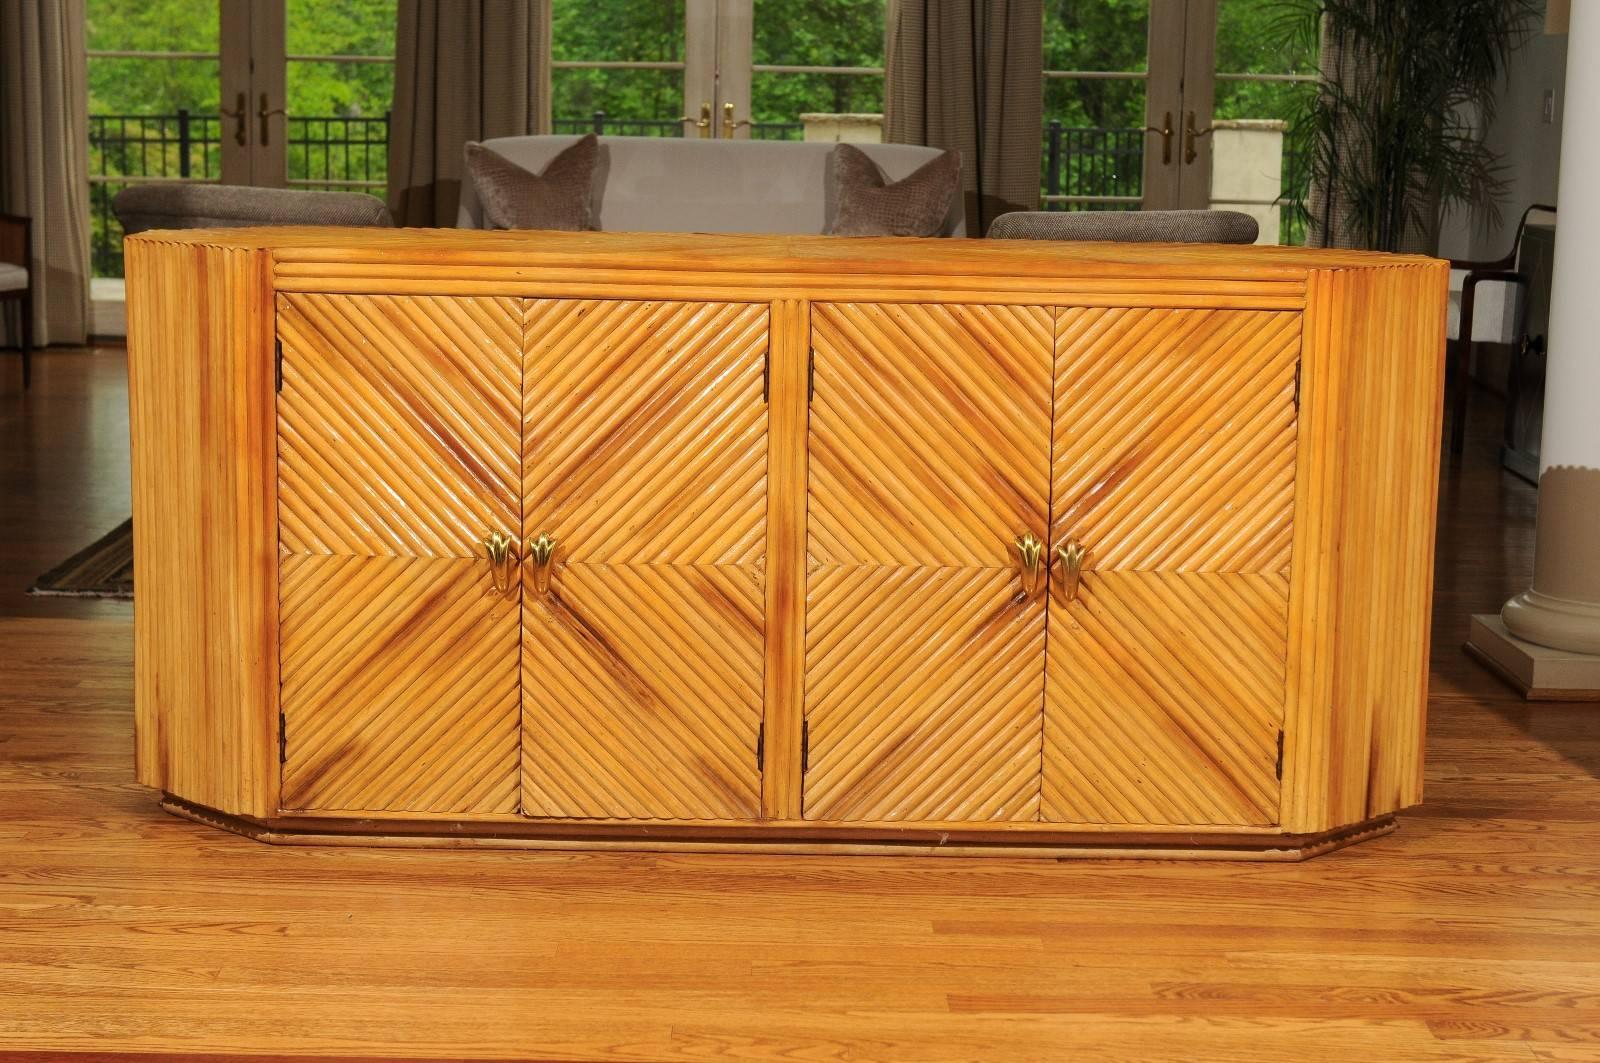 This magnificent chest is shipped as professionally photographed and described in the listing narrative: Completely Installation Ready.

An exceptional vintage bamboo cabinet or buffet, circa 1970s. Diagonally applied split bamboo veneer over solid